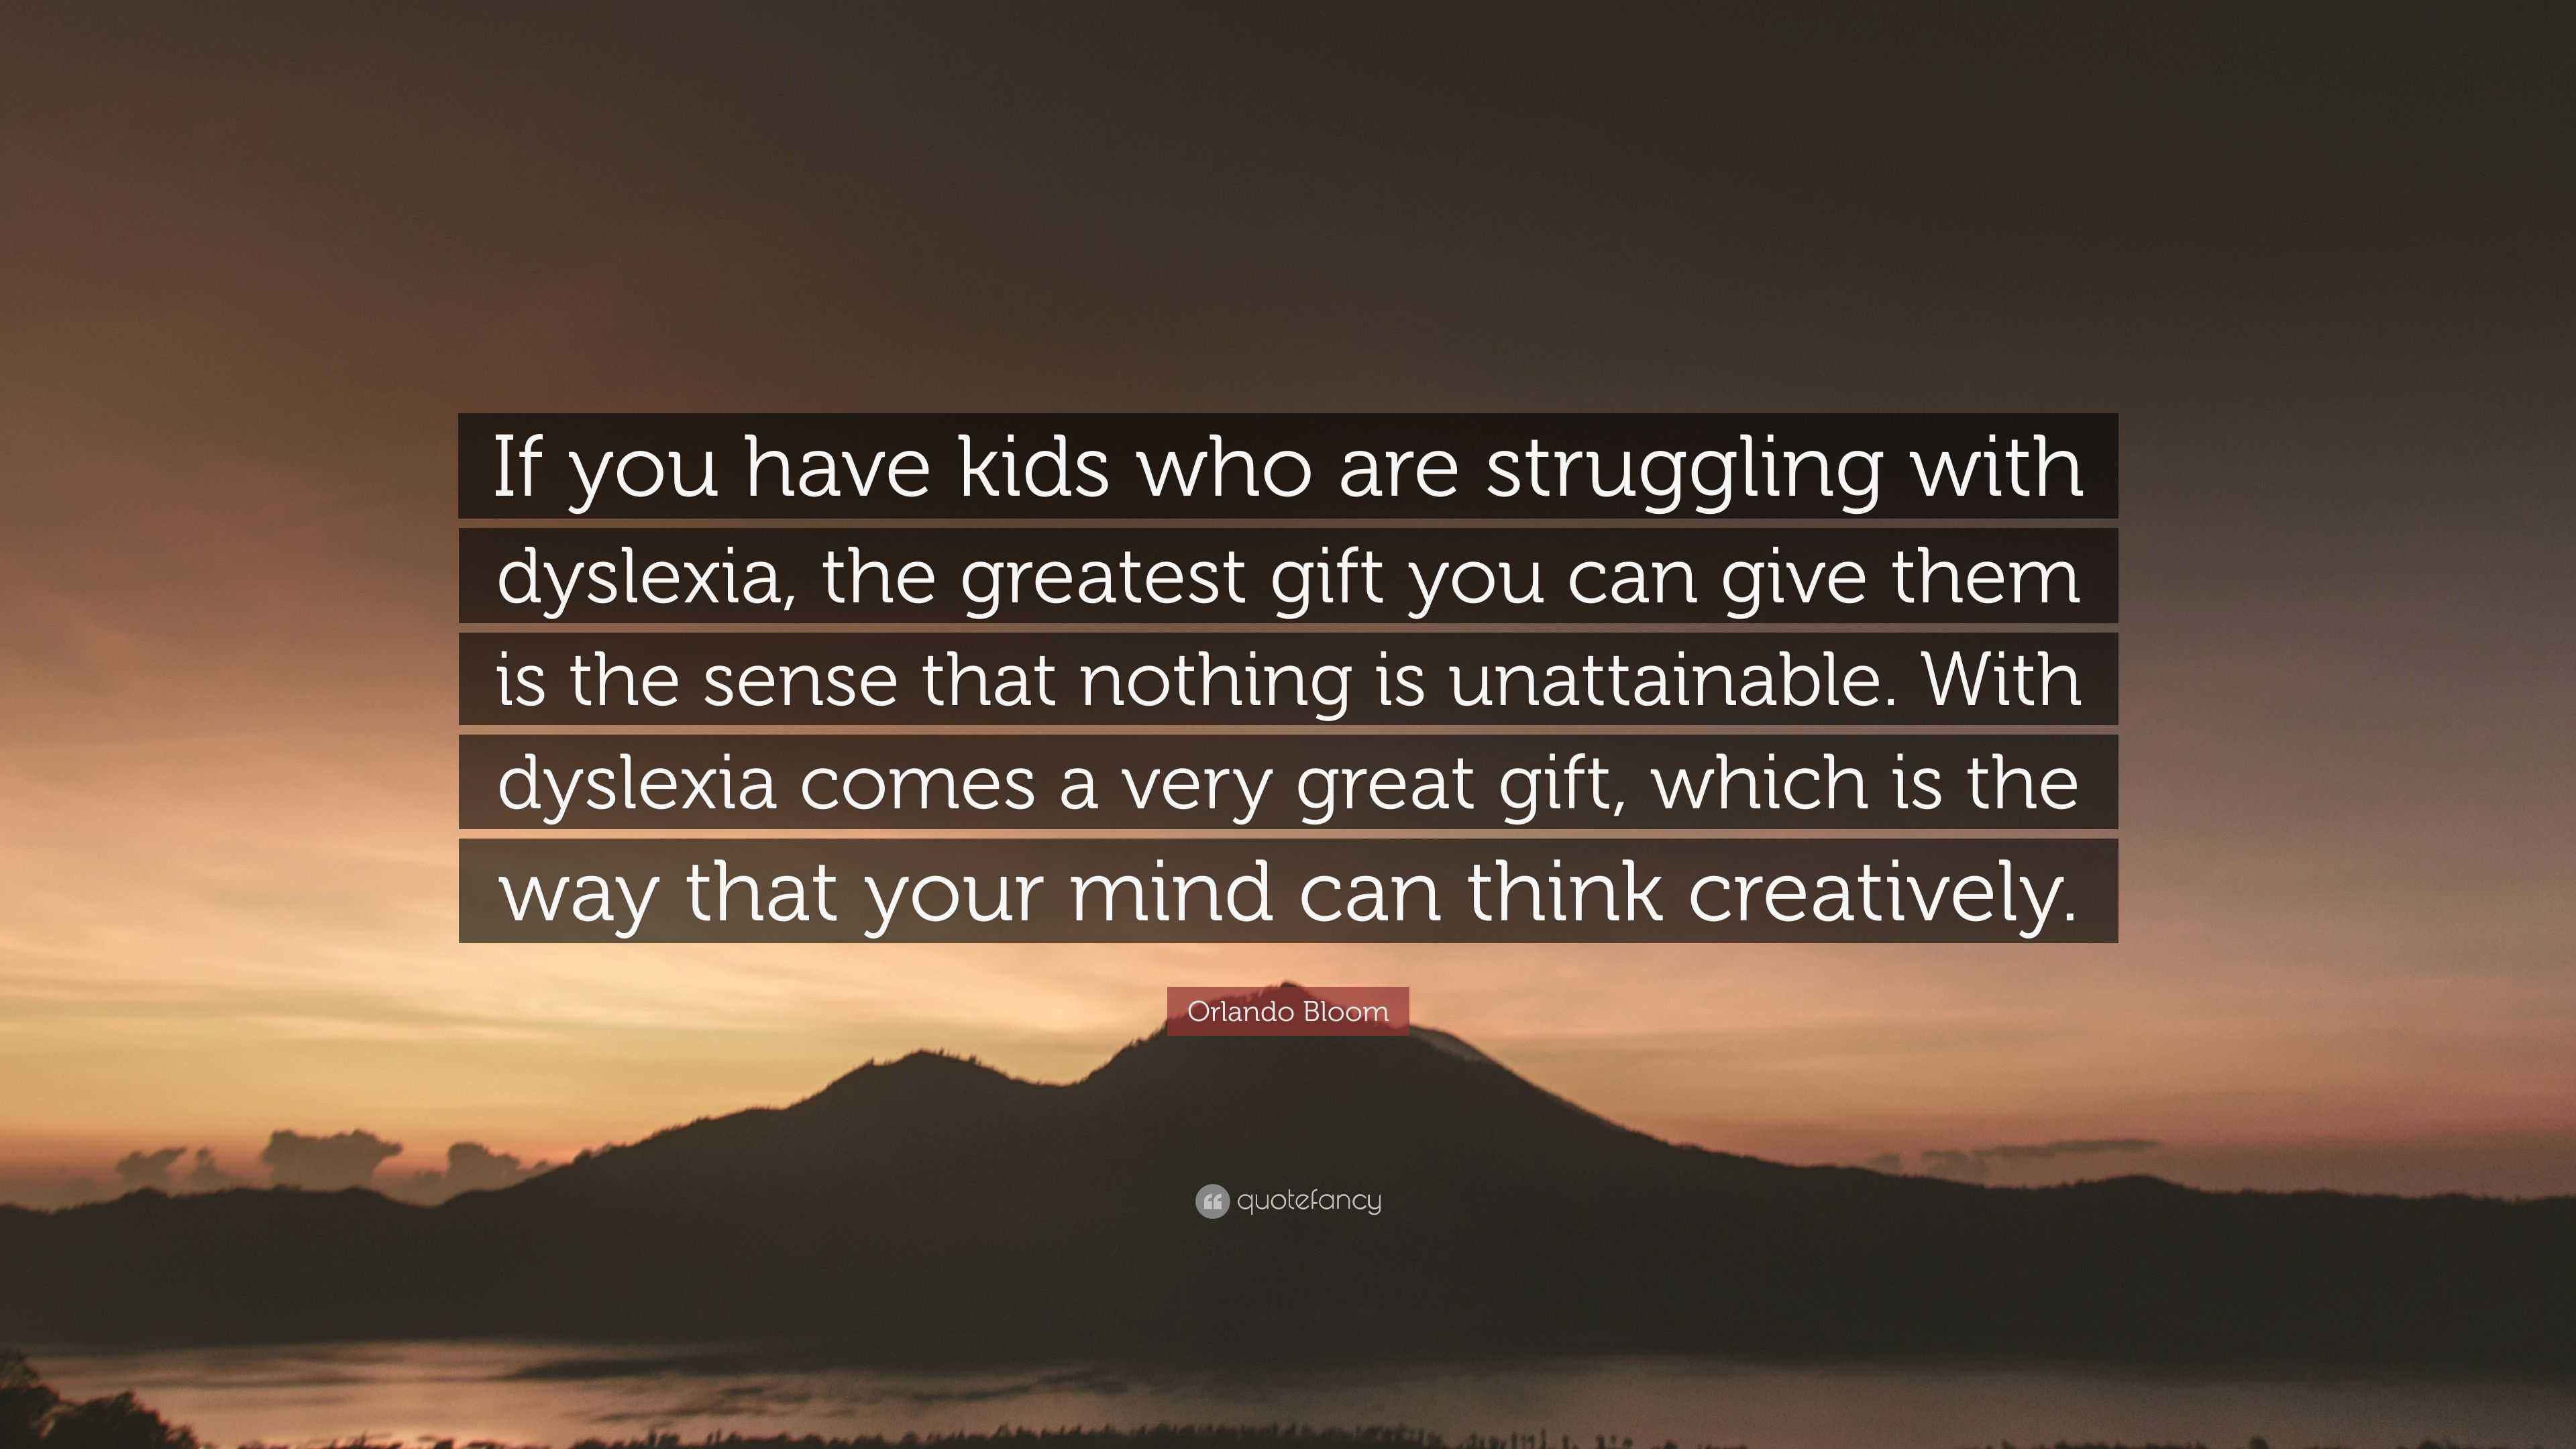 Orlando Bloom Quote: “If you have kids who are struggling with dyslexia